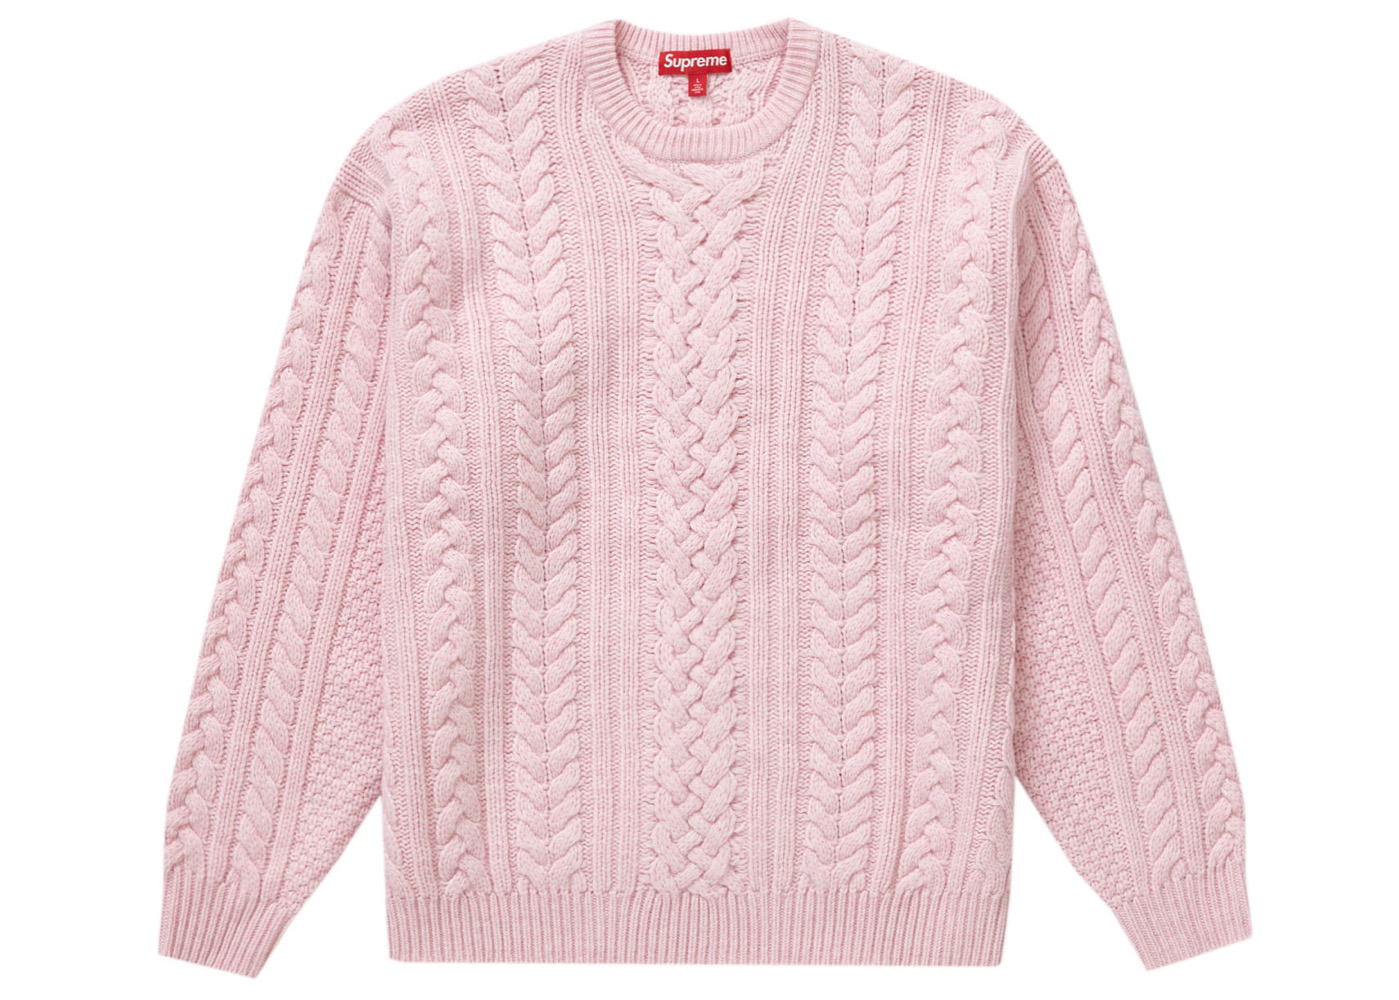 Supreme Applique Cable Knit Sweater写真を見ての通り